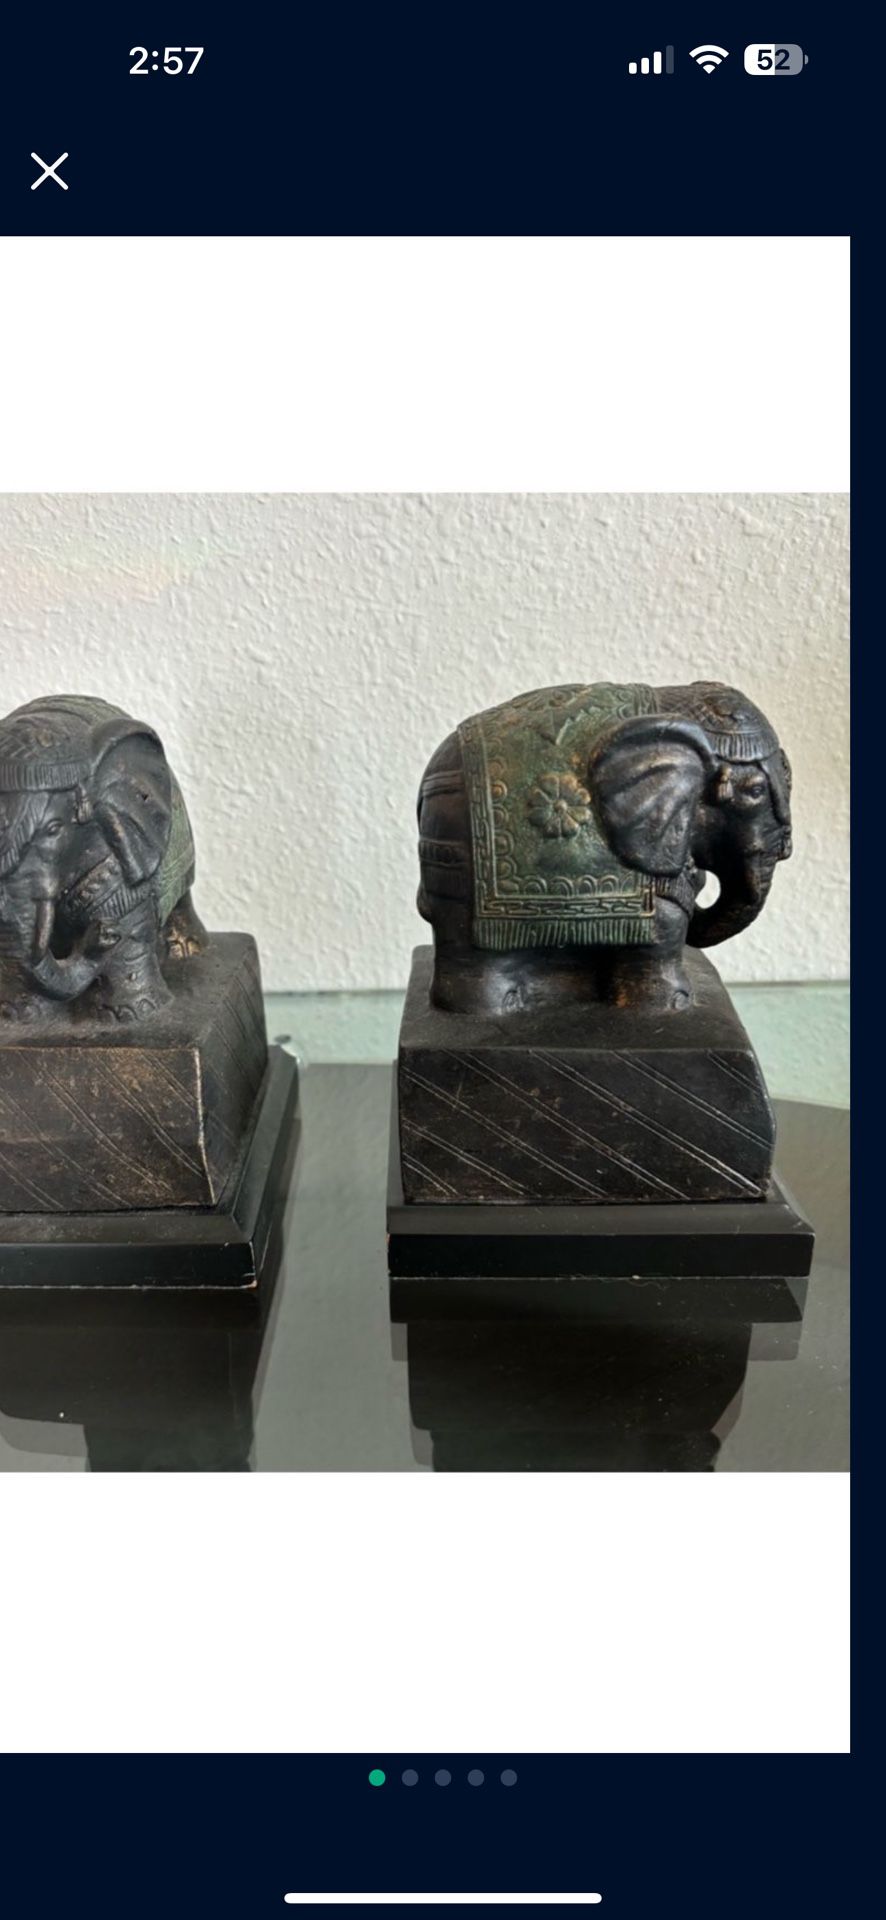 Pair of 19th century decorative made in India elephant bookends